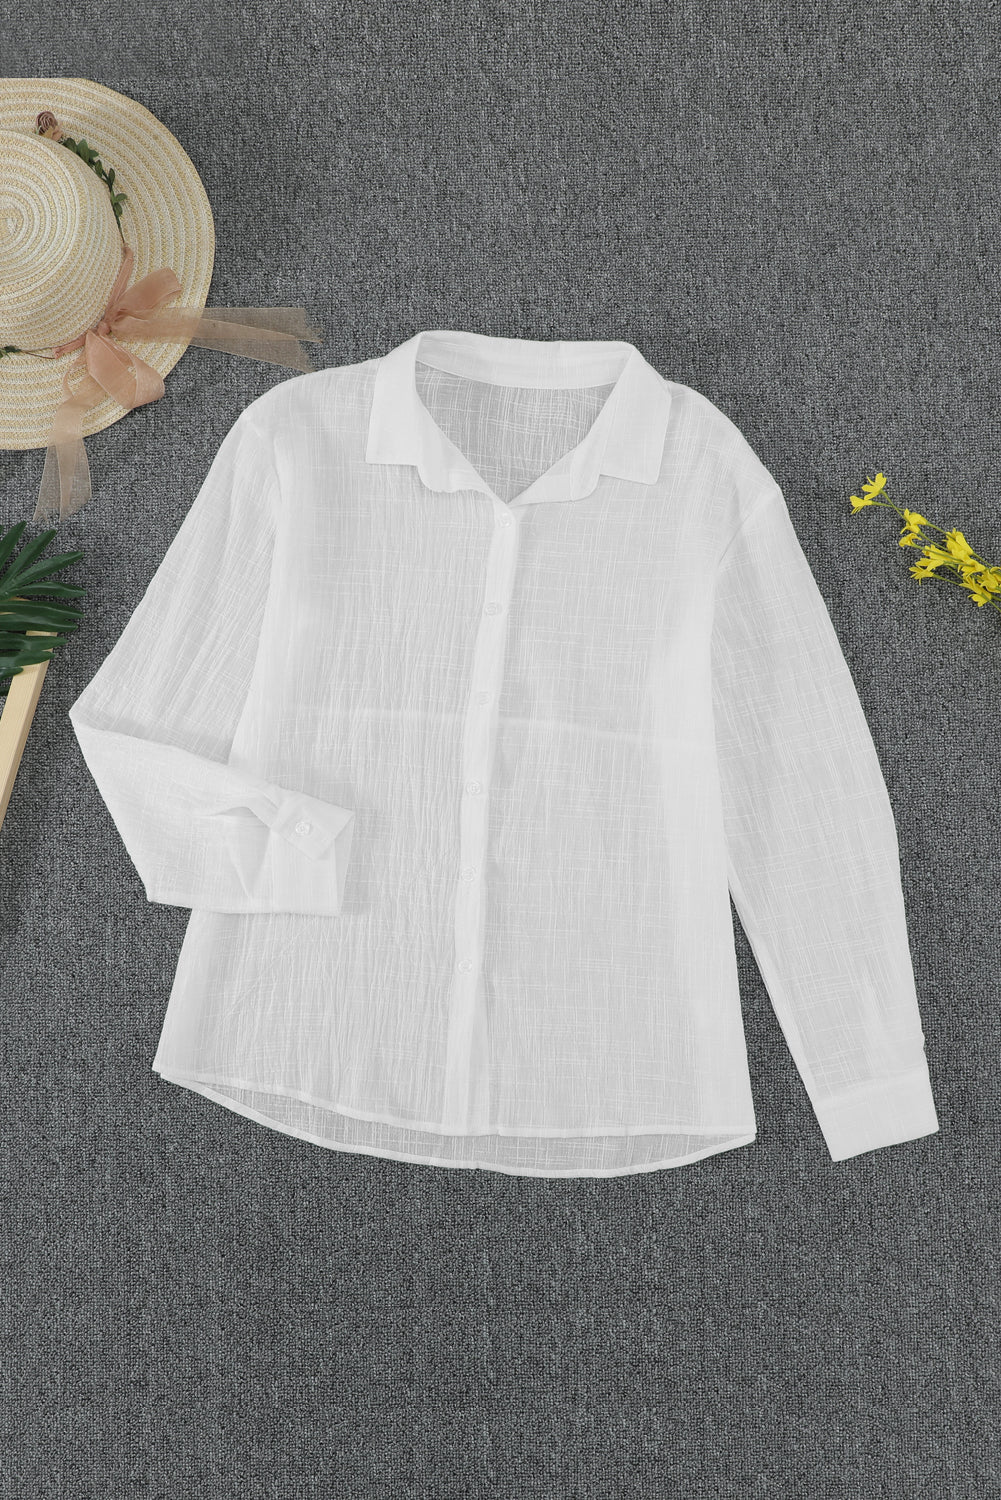 White Long Sleeve Collared Button Up Shirt for Women